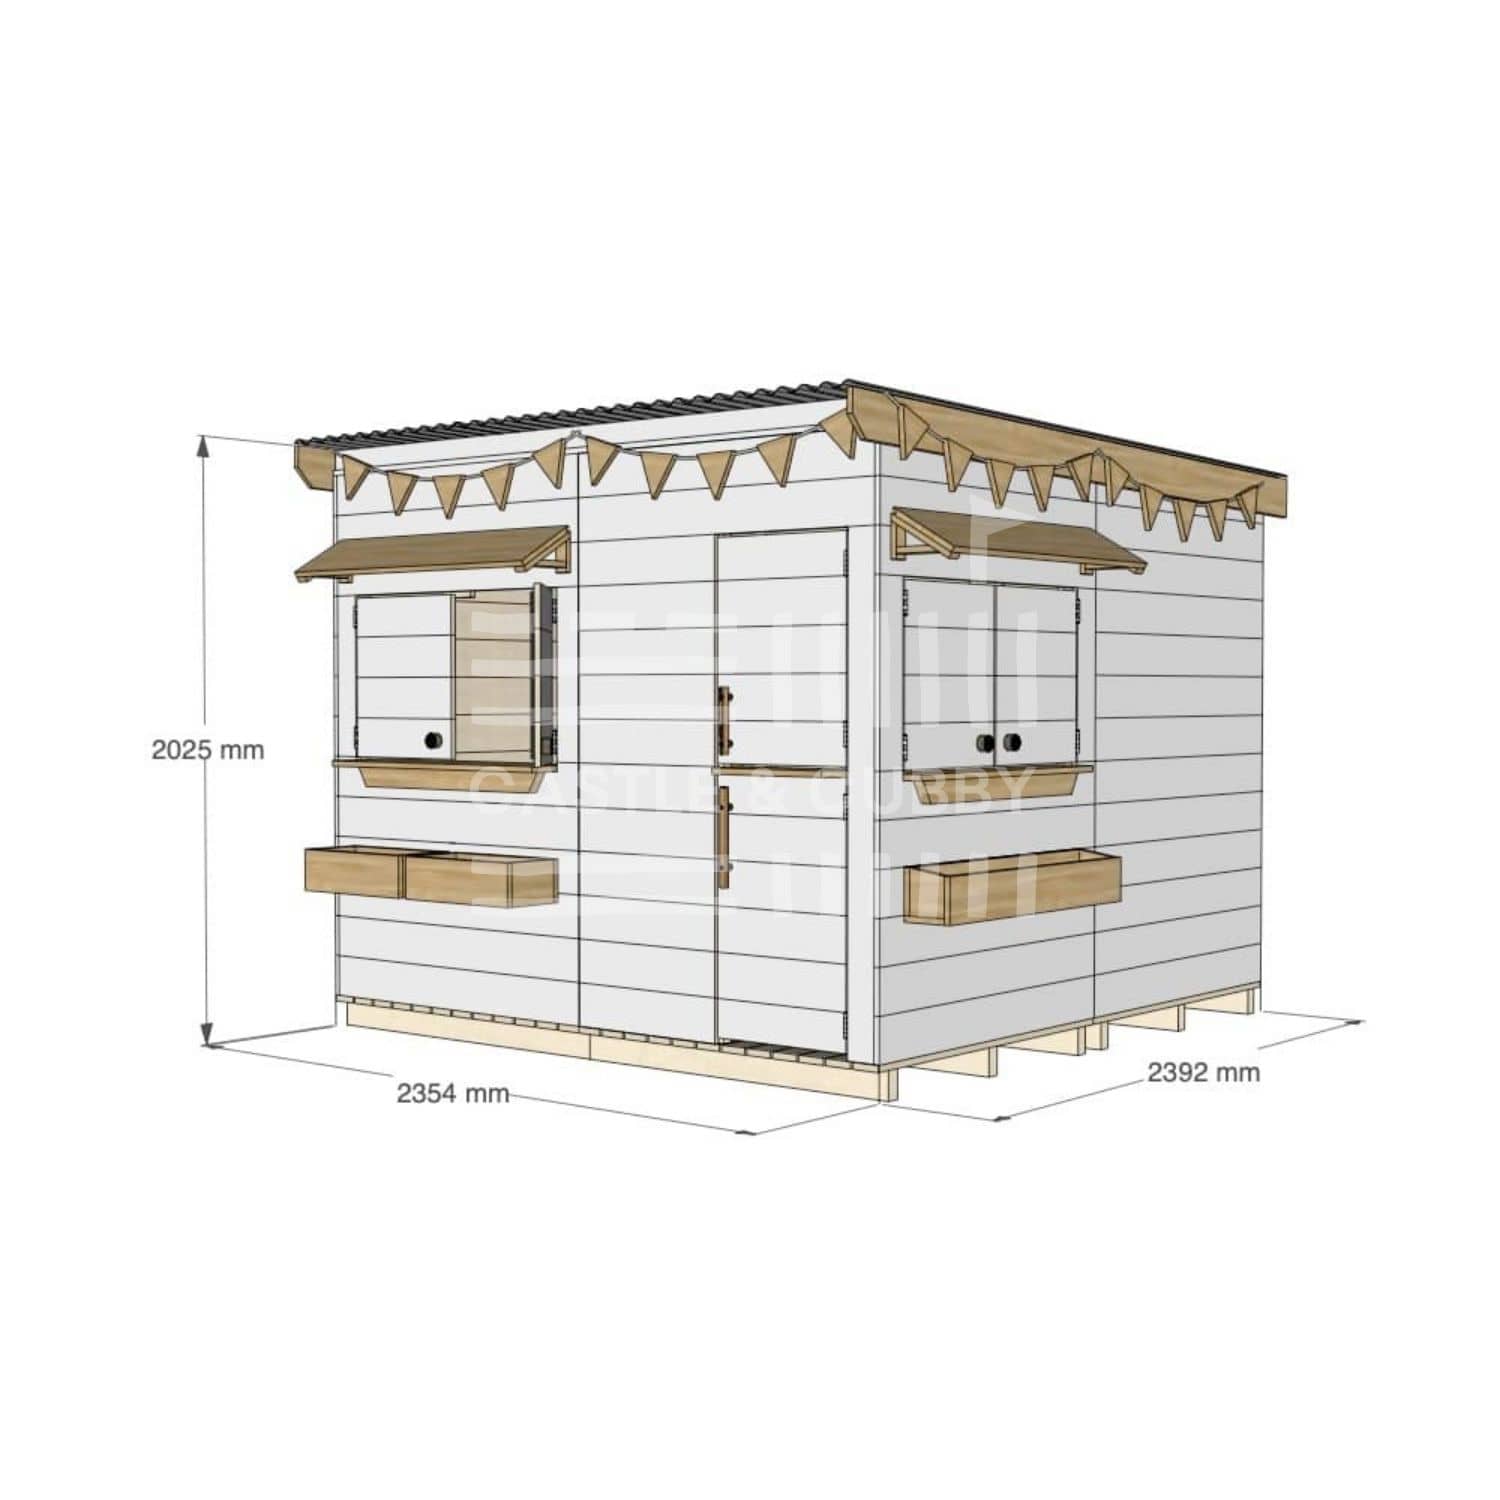 Flat roof extended height painted pine timber cubby house domestic large square size with accessories